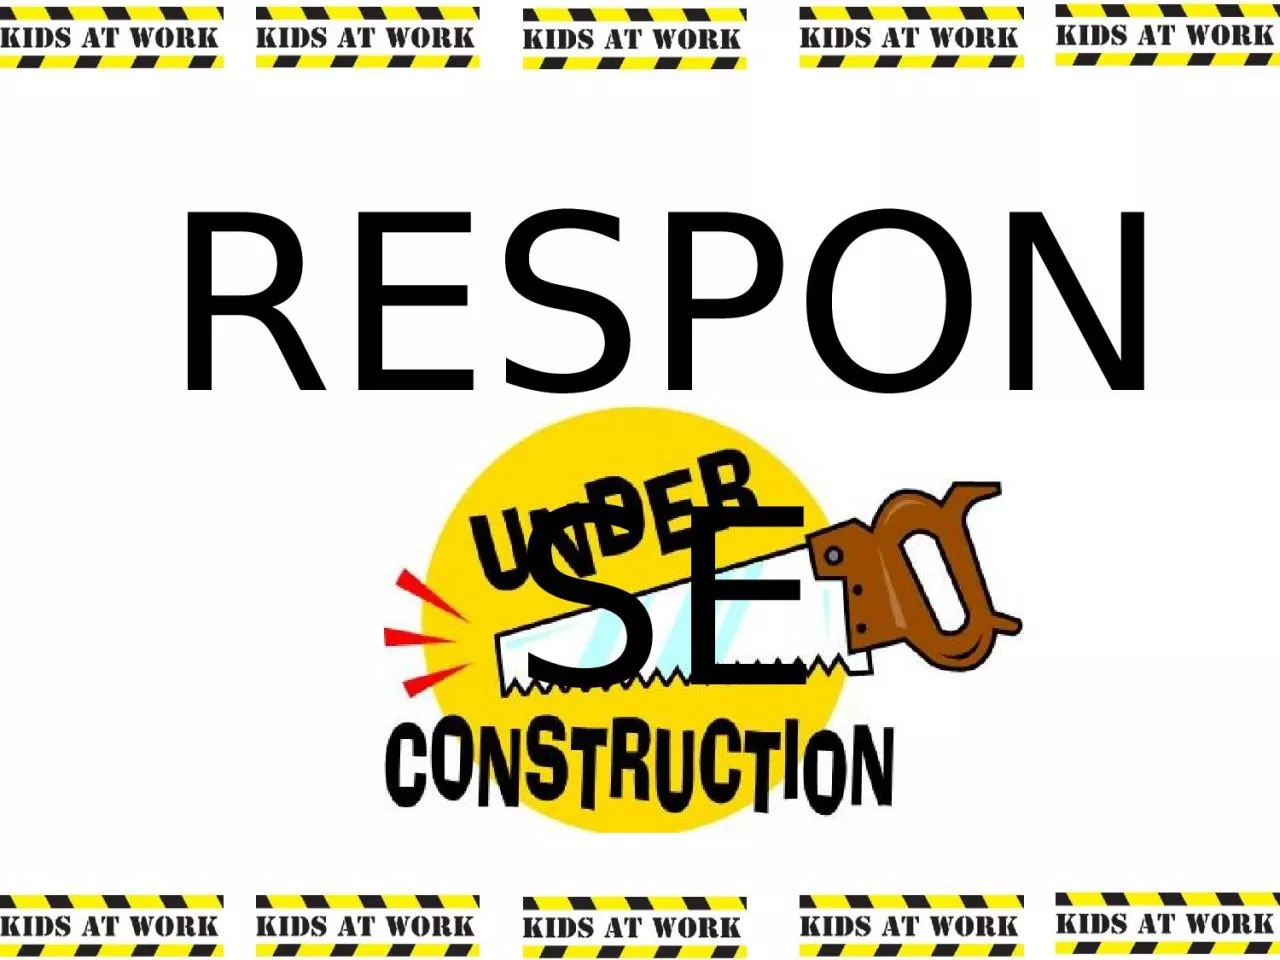 RESPONSE RESPONSE A constructed response is an